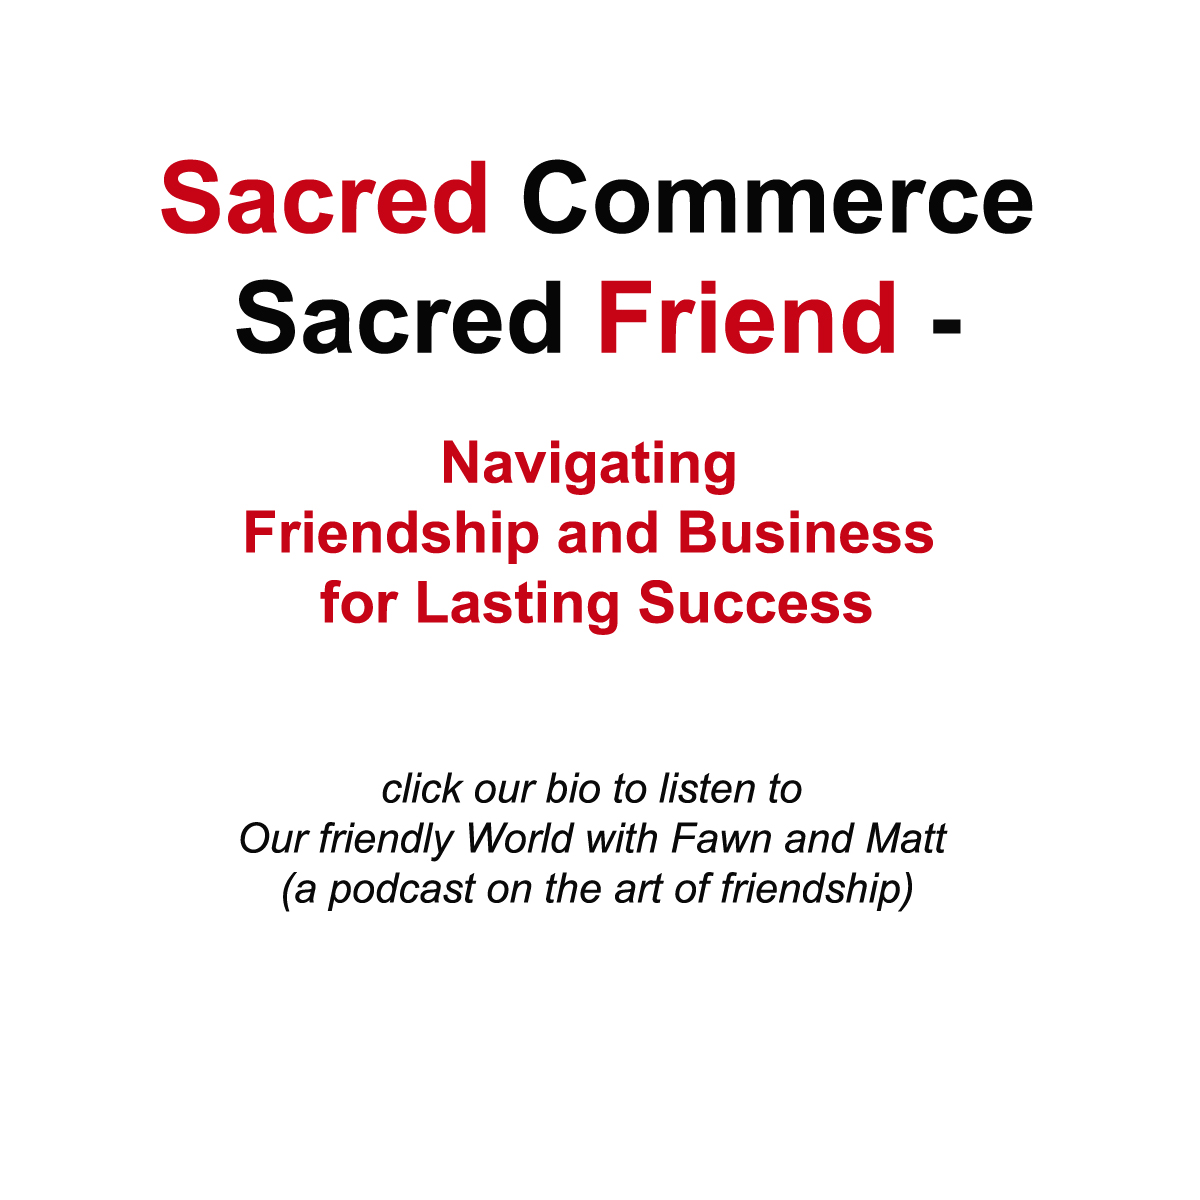 "Sacred Commerce, Sacred Friend: Navigating Friendship and Business for Lasting Success"